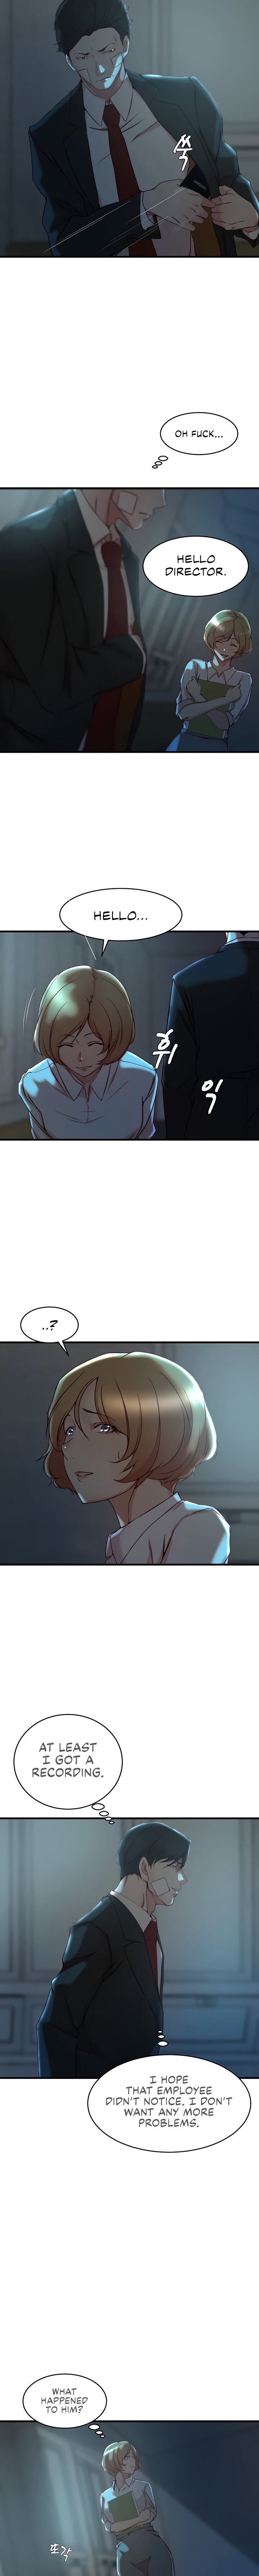 Sister-in-Law Manhwa - Chapter 34 Page 4